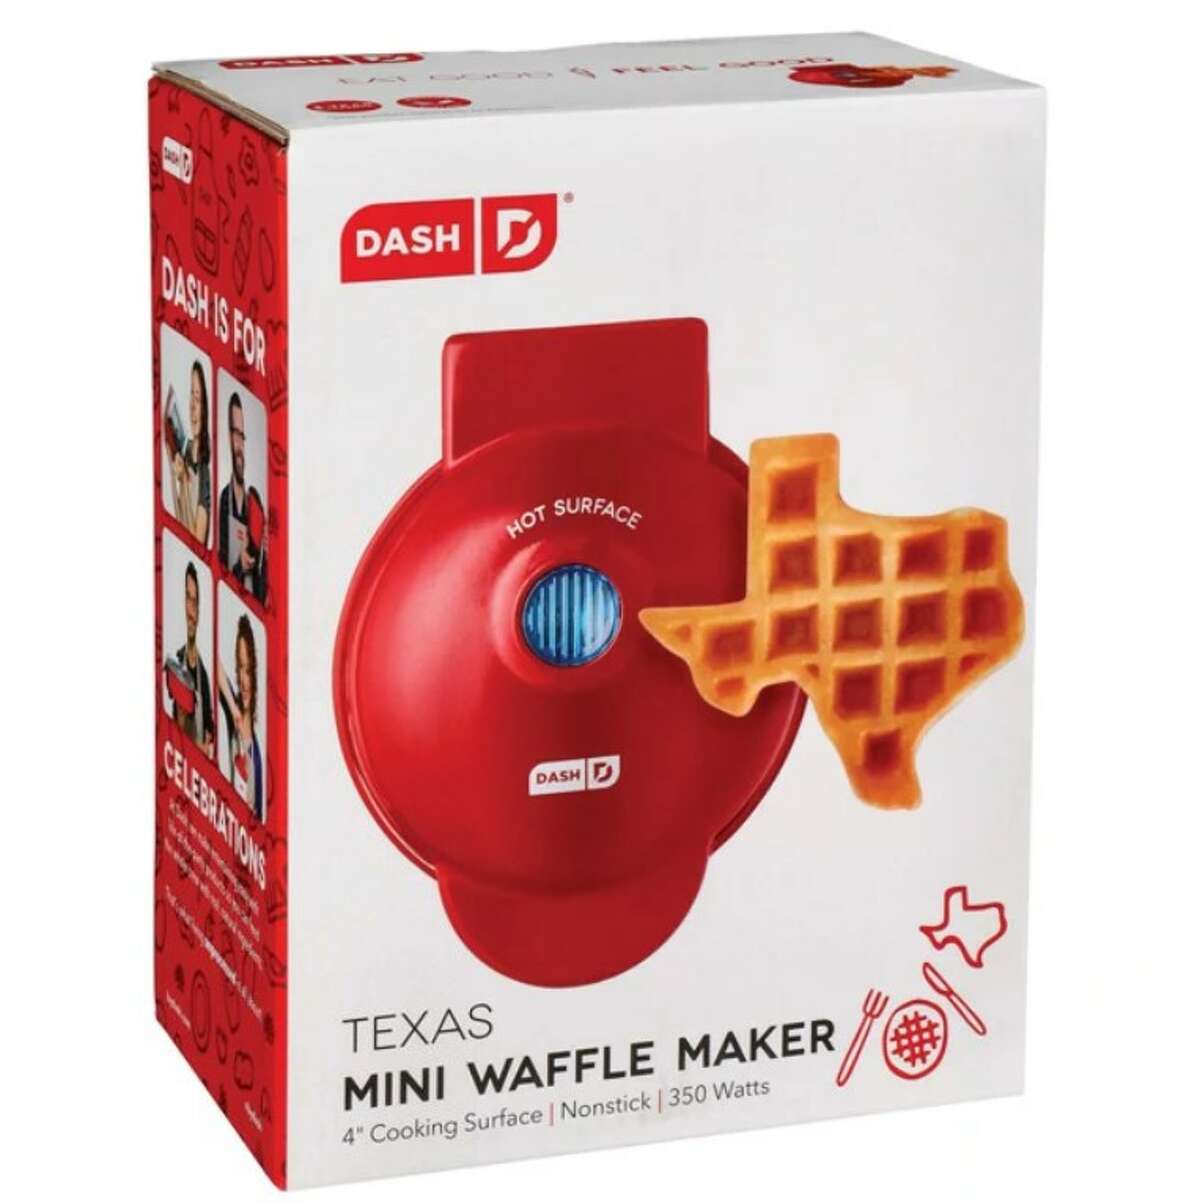 Dash and H-E-B partnered to get the adorable Texas-shaped mini waffle maker on shelves. 